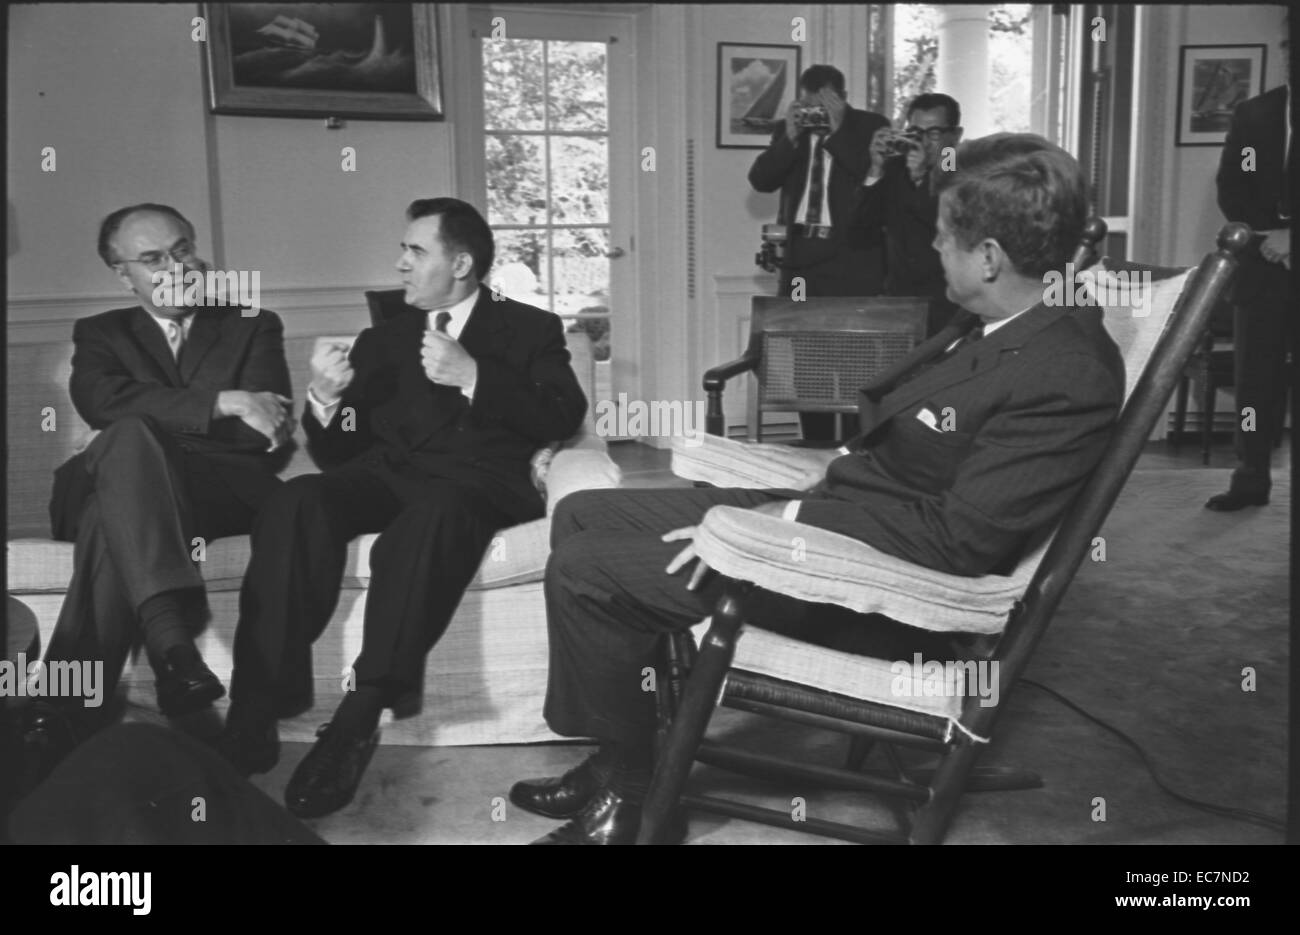 Soviet ambassador to the US, Anatoly F. Dobrynin and Soviet foreign minister Andrei Gromyko talking with President Kennedy who is seated in rocking chair, at the White House, Washington, D.C. during the Cuban missile crisis. Stock Photo